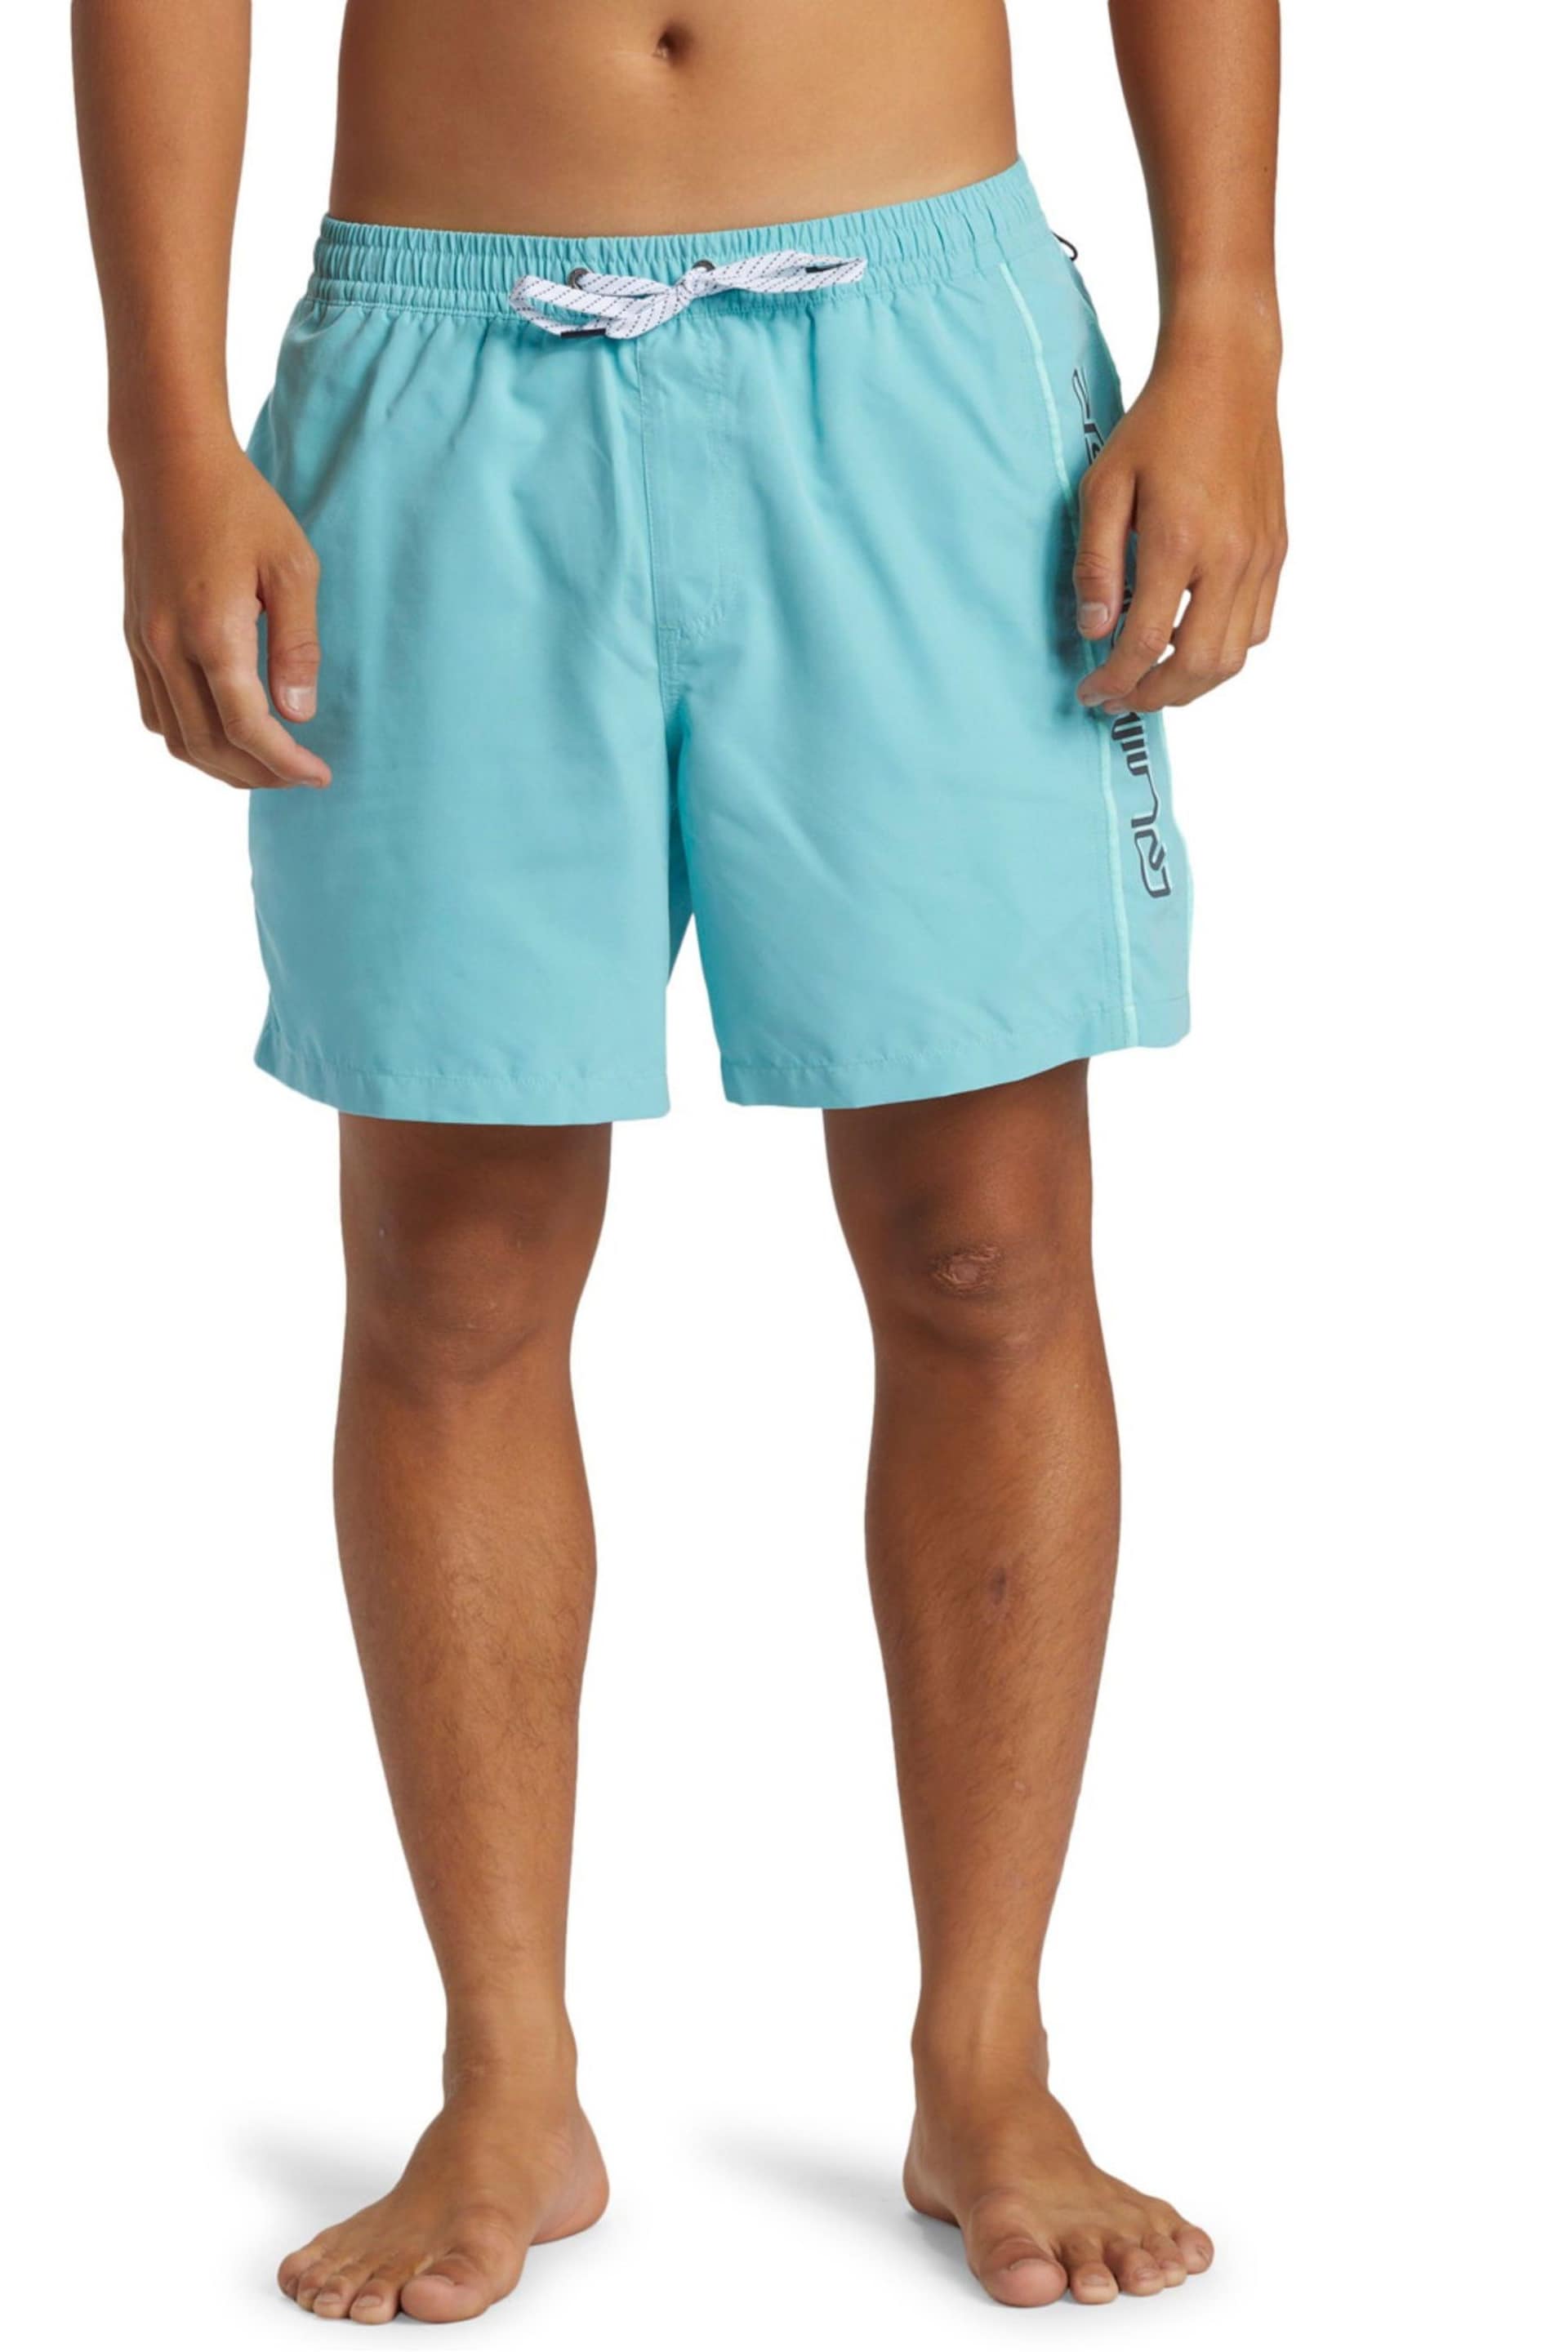 Quiksilver Blue Logo Volley Shorts - Image 1 of 7